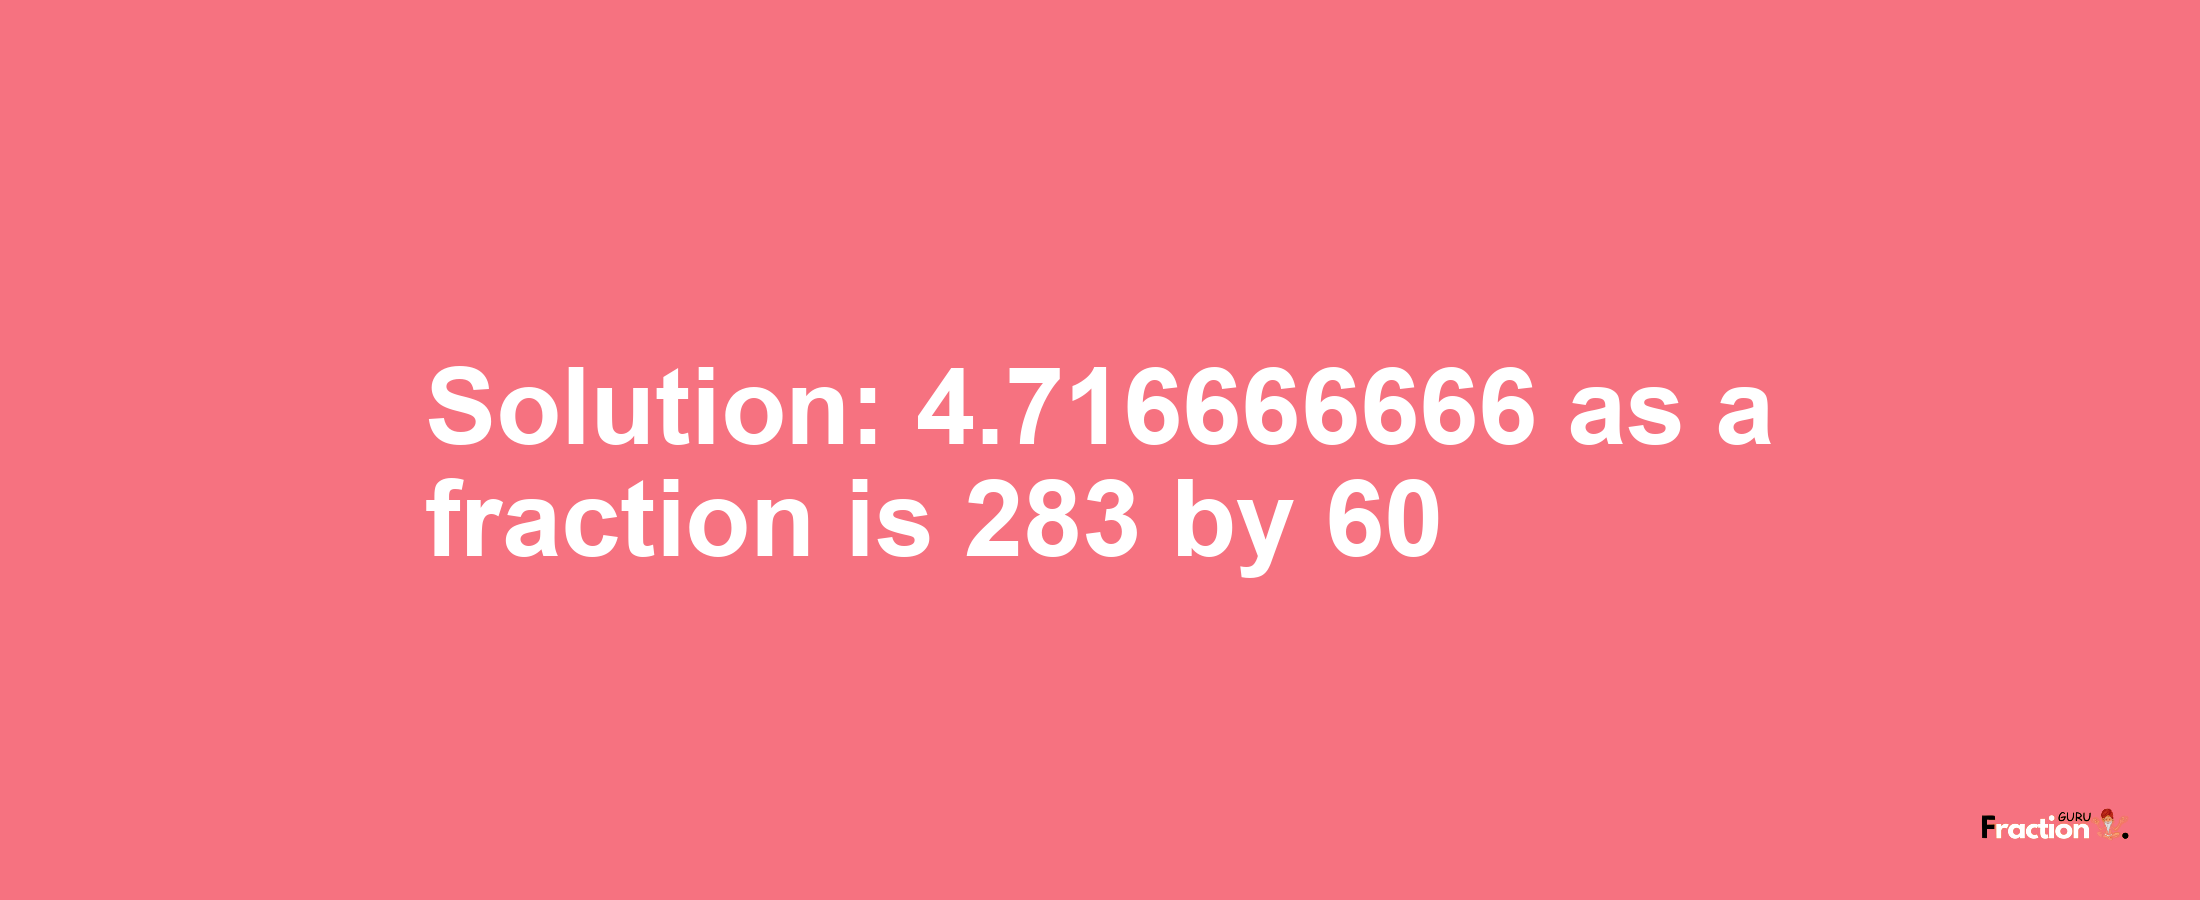 Solution:4.716666666 as a fraction is 283/60